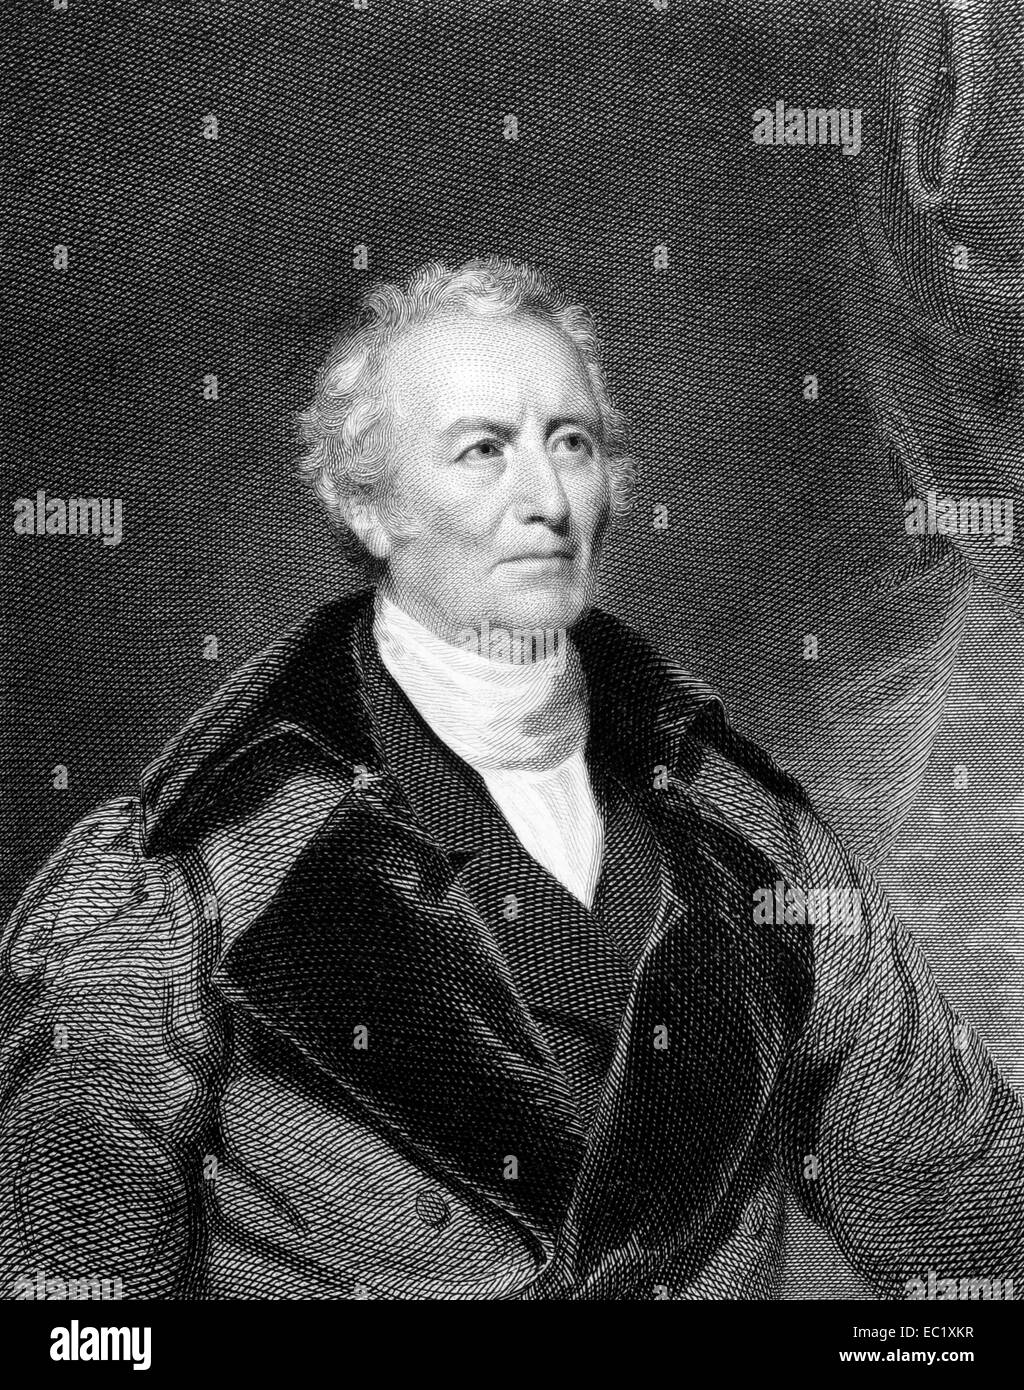 John Trumbull (1756-1843) on engraving from 1834.  American painter during the period of the American Revolutionary War. Stock Photo